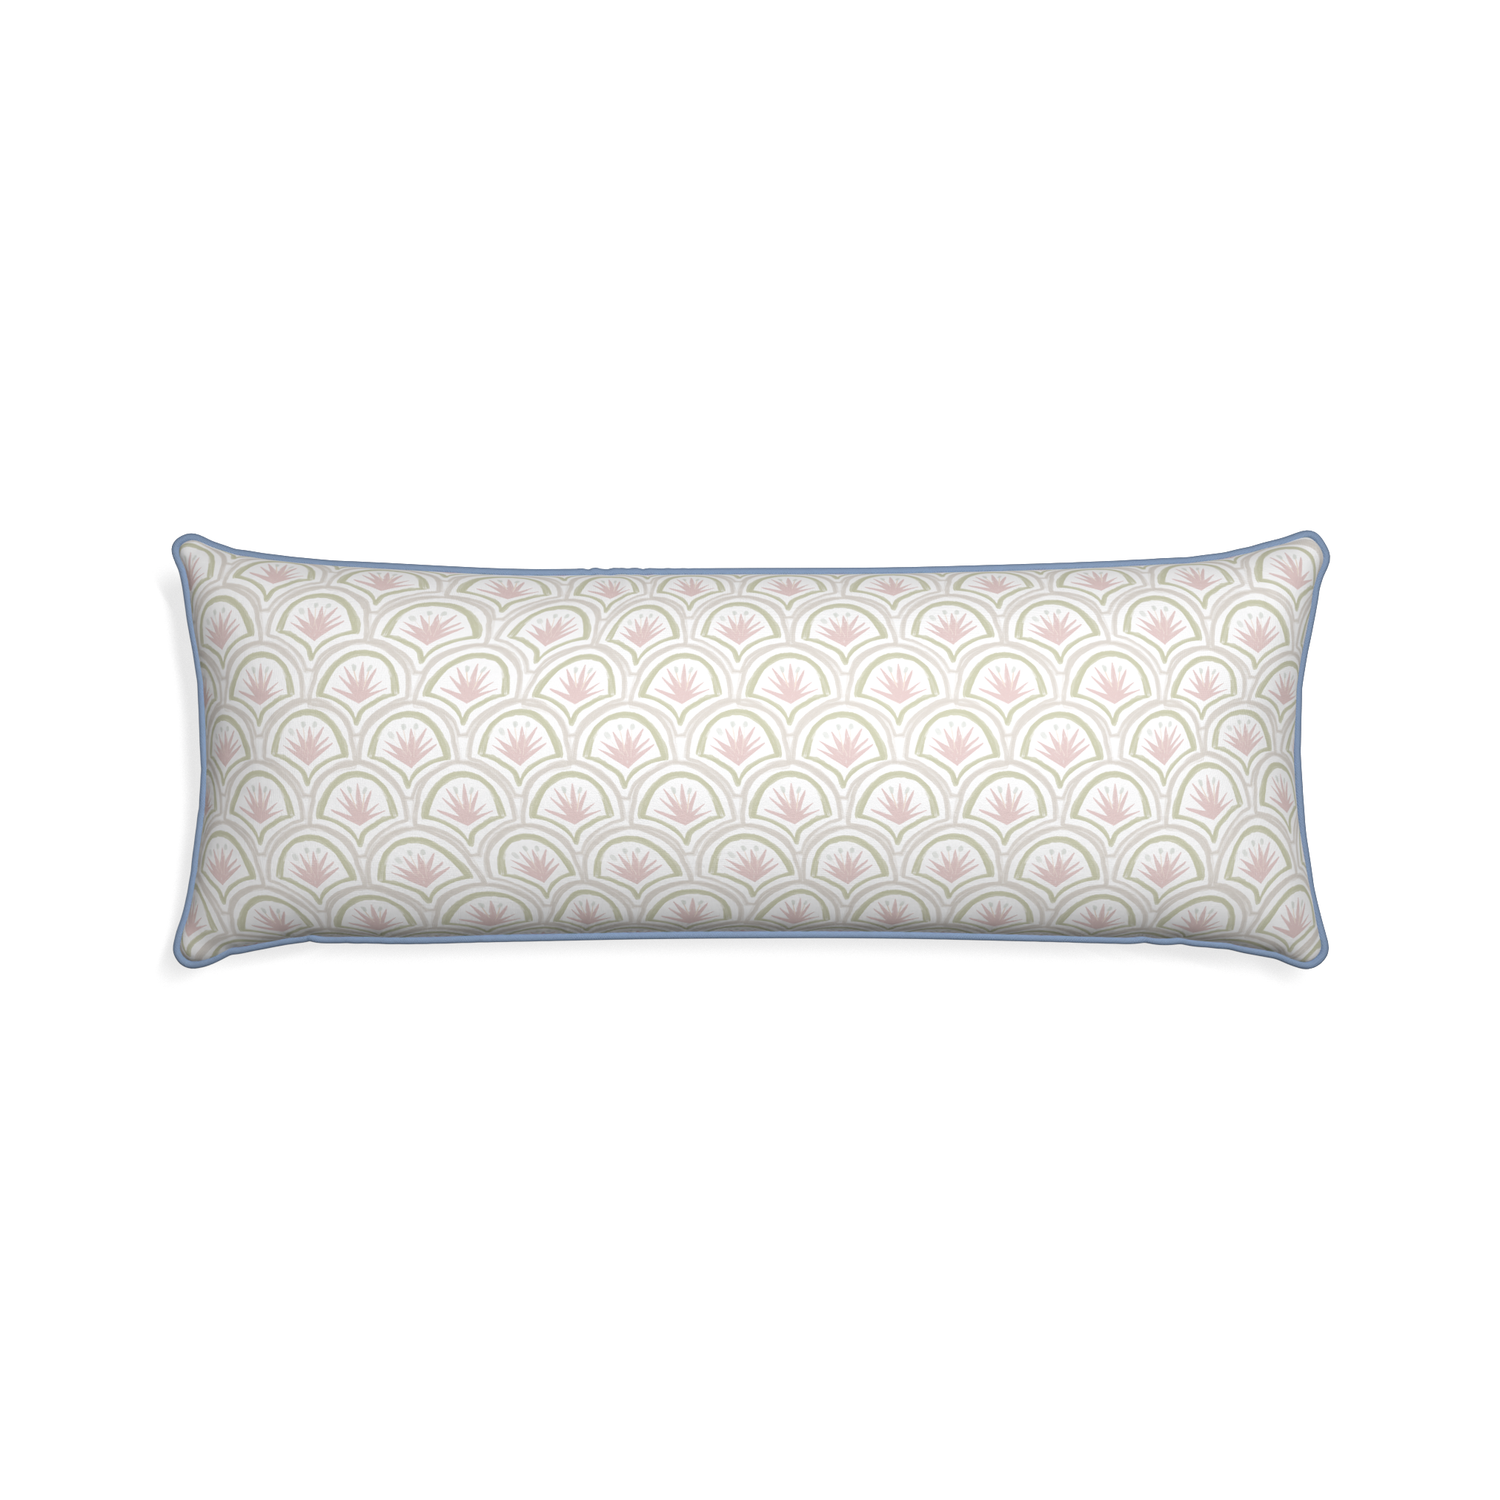 Xl-lumbar thatcher rose custom pillow with sky piping on white background